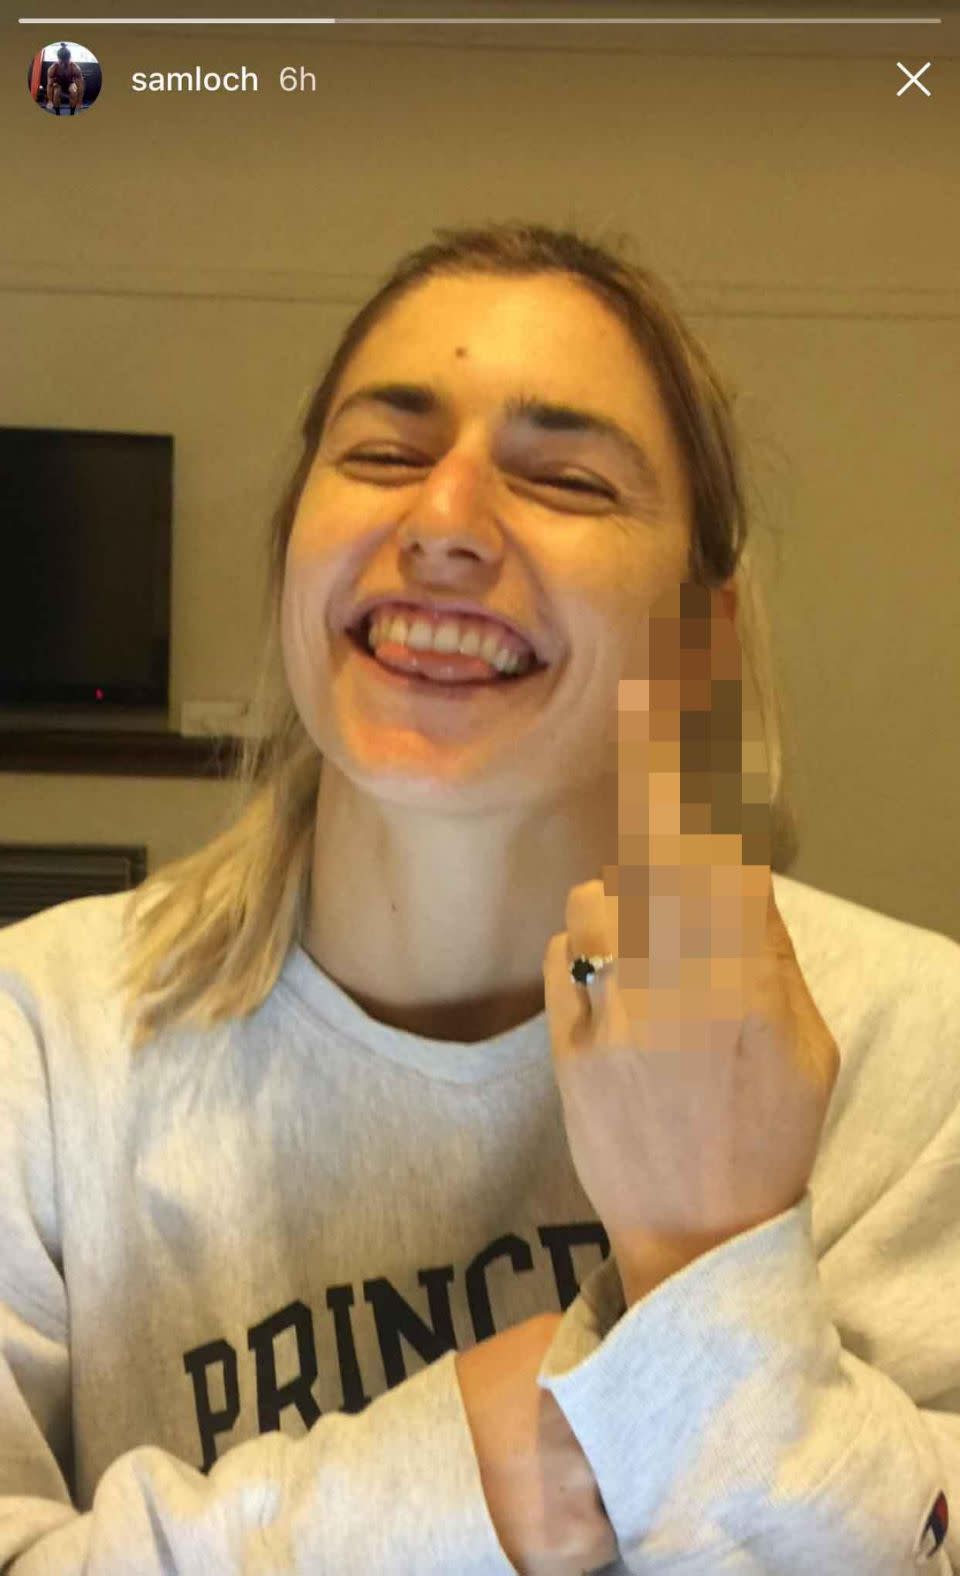 Frances Abbott showed off her engagement ring on Sam's Instagram while giving a cheeky middle finger to the camera. Source: Instagram